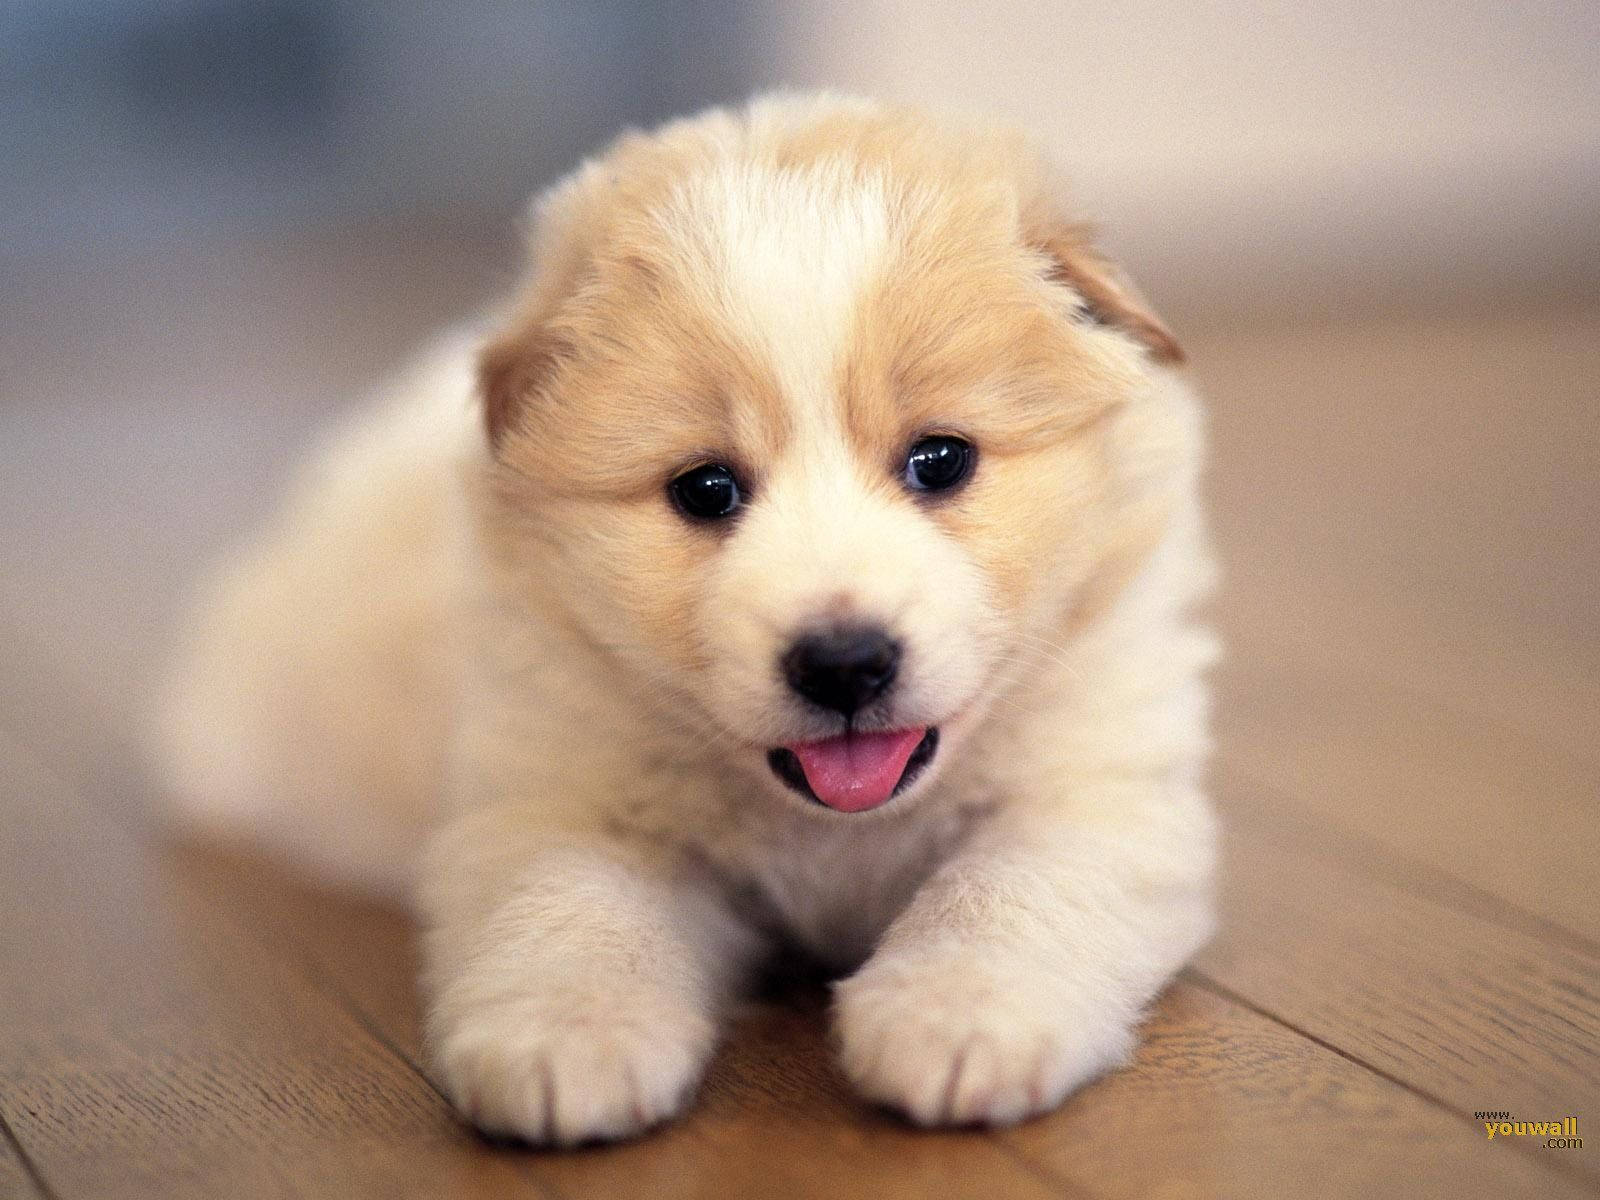 Cute Dog Small Tongue Out